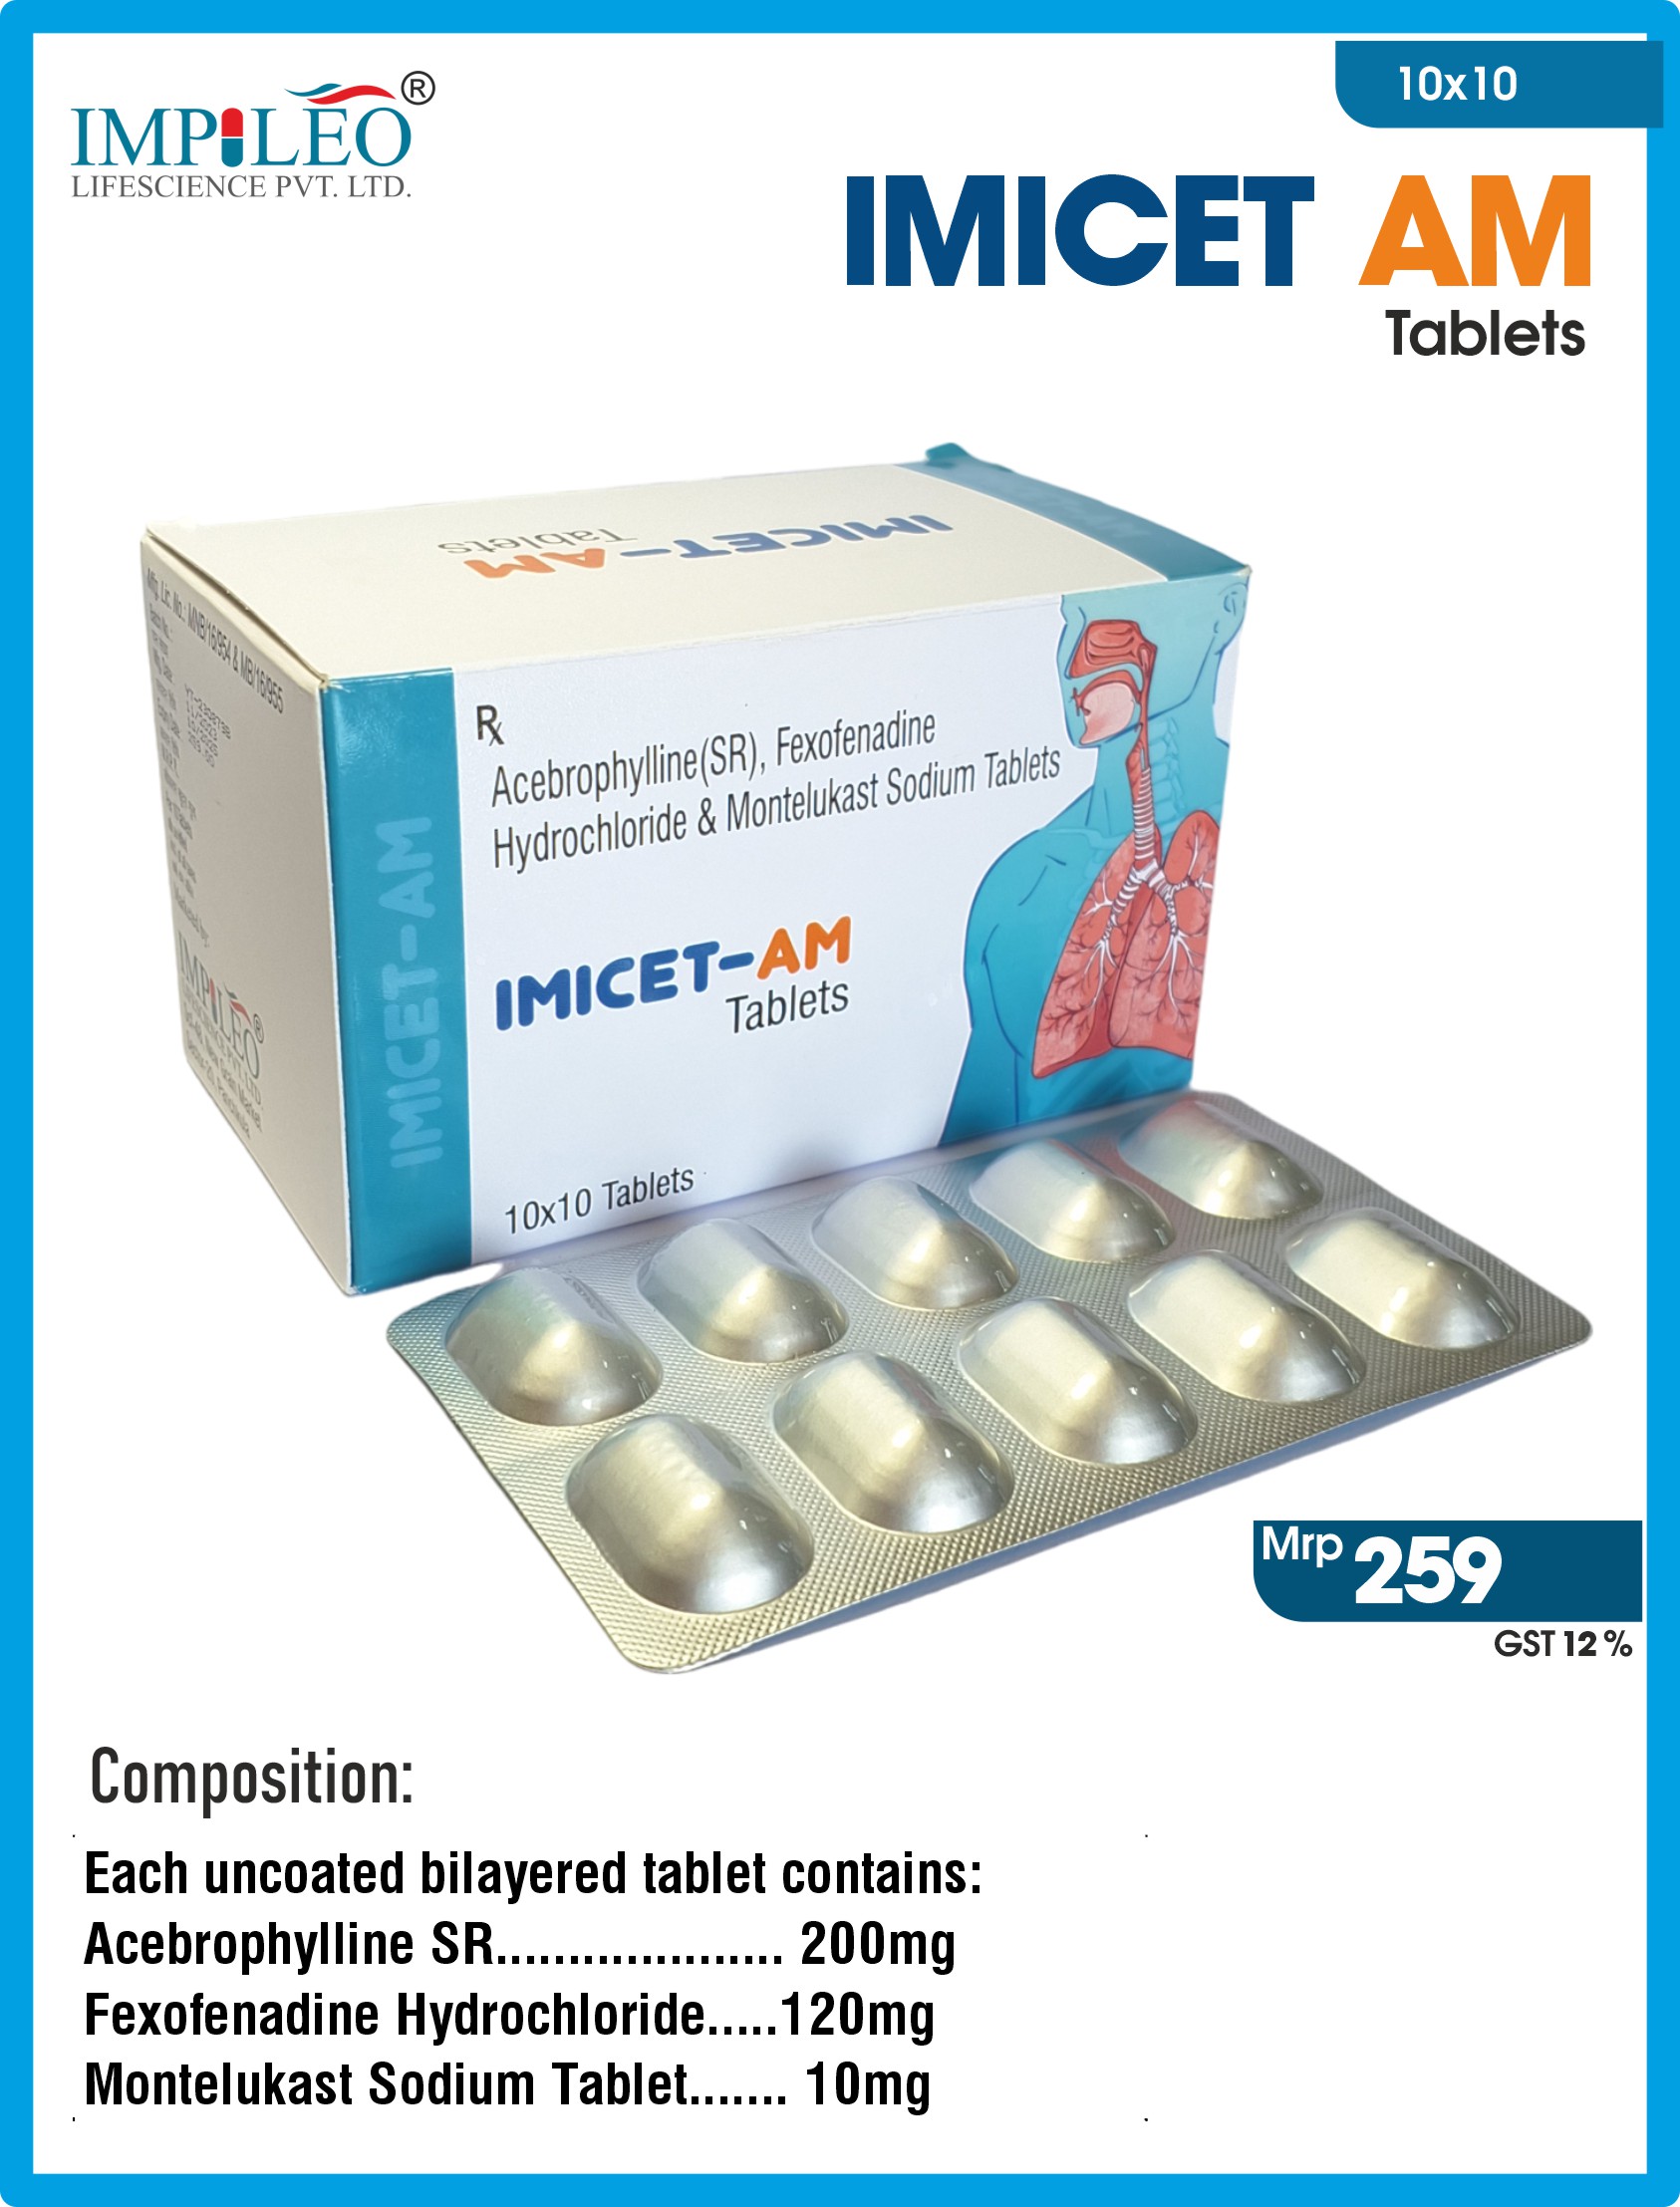 Acebrophylline+Fexofenadine+Montelukast (Imicet FX) Tablets From Third Party Manufacturer in India